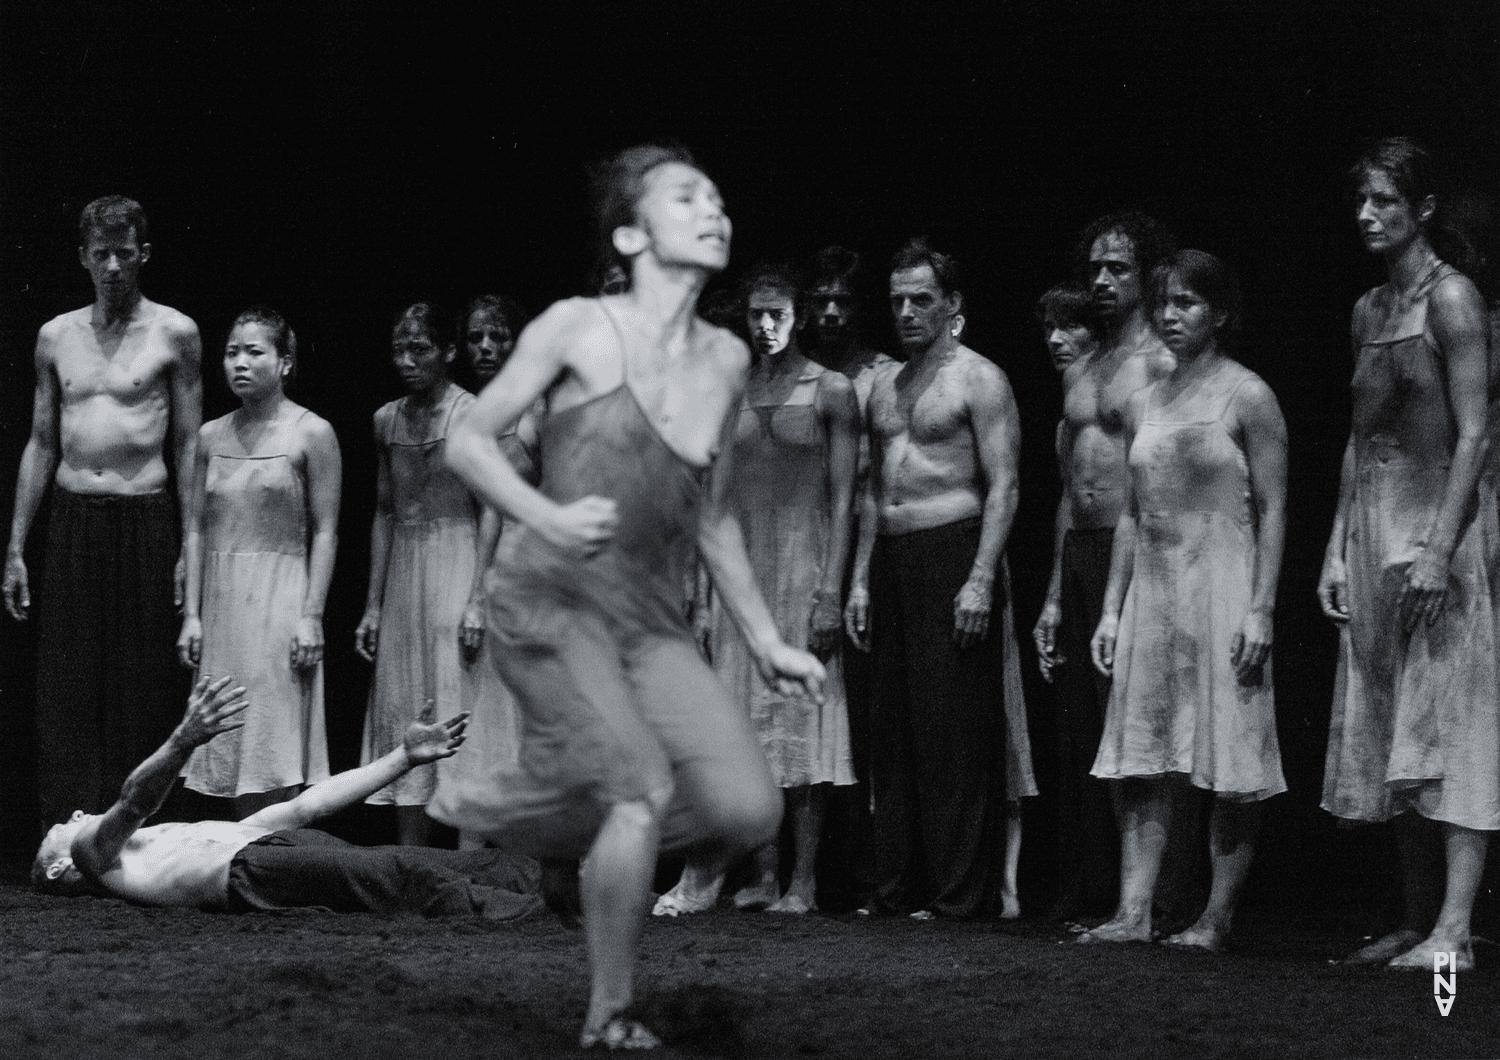 “The Rite of Spring” by Pina Bausch, Sept. 5, 2007